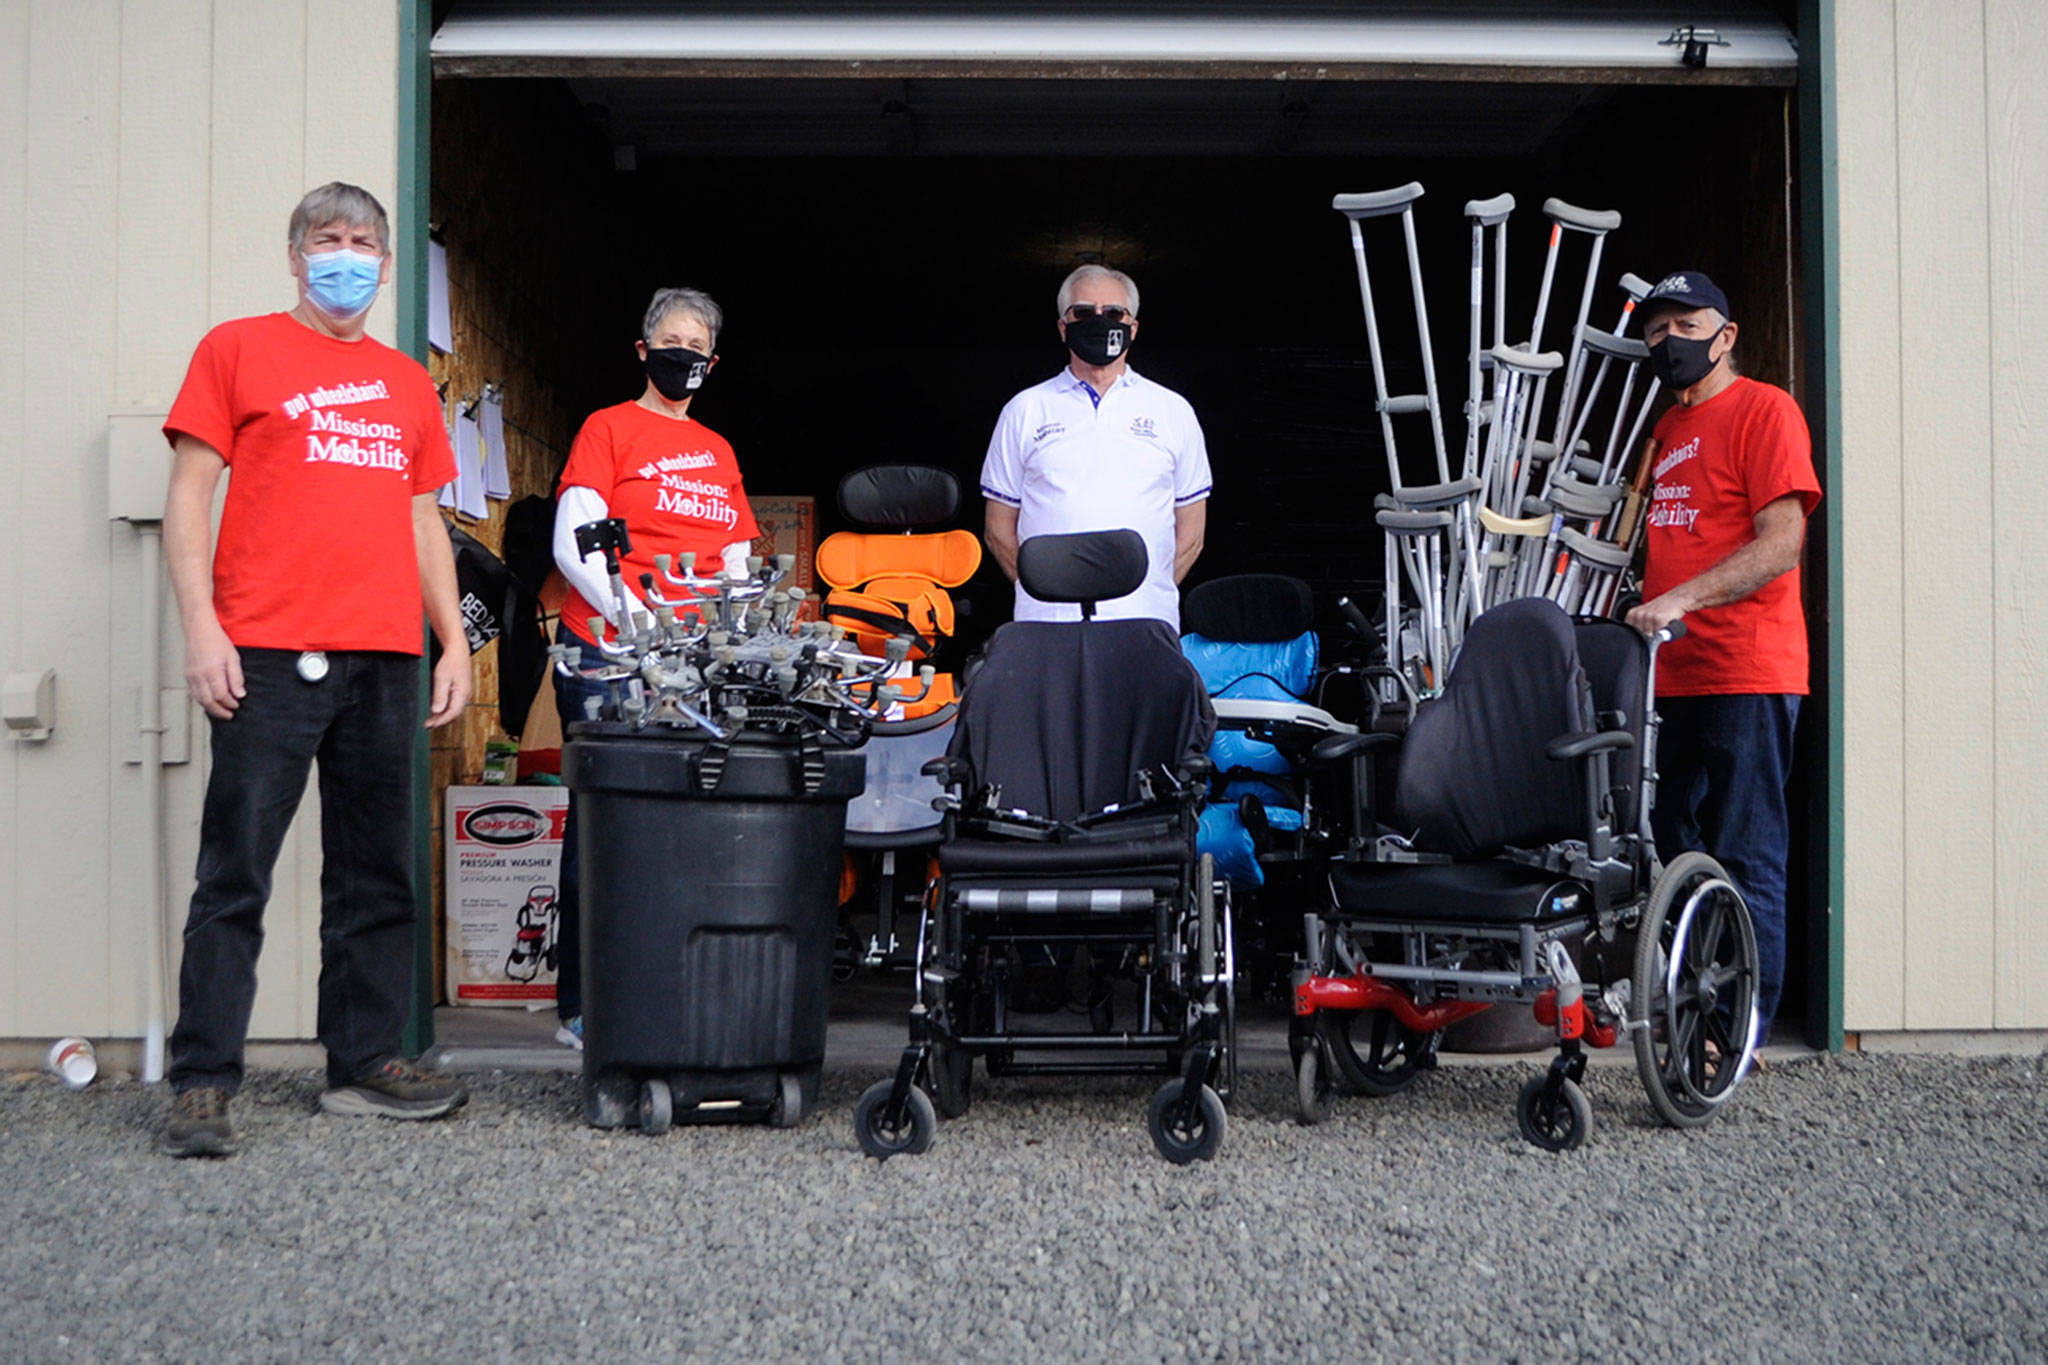 Volunteers at Dungeness Community Church, from left, Al Chrisman, organizer Rosalie DiMaggio, Martin Murray and Jim Coley seek donated wheelchairs, walkers, canes and more to ship to Guatemala as part of their church’s effort to support people in Chimaltenango gain mobility. Sequim Gazette photo by Matthew Nash